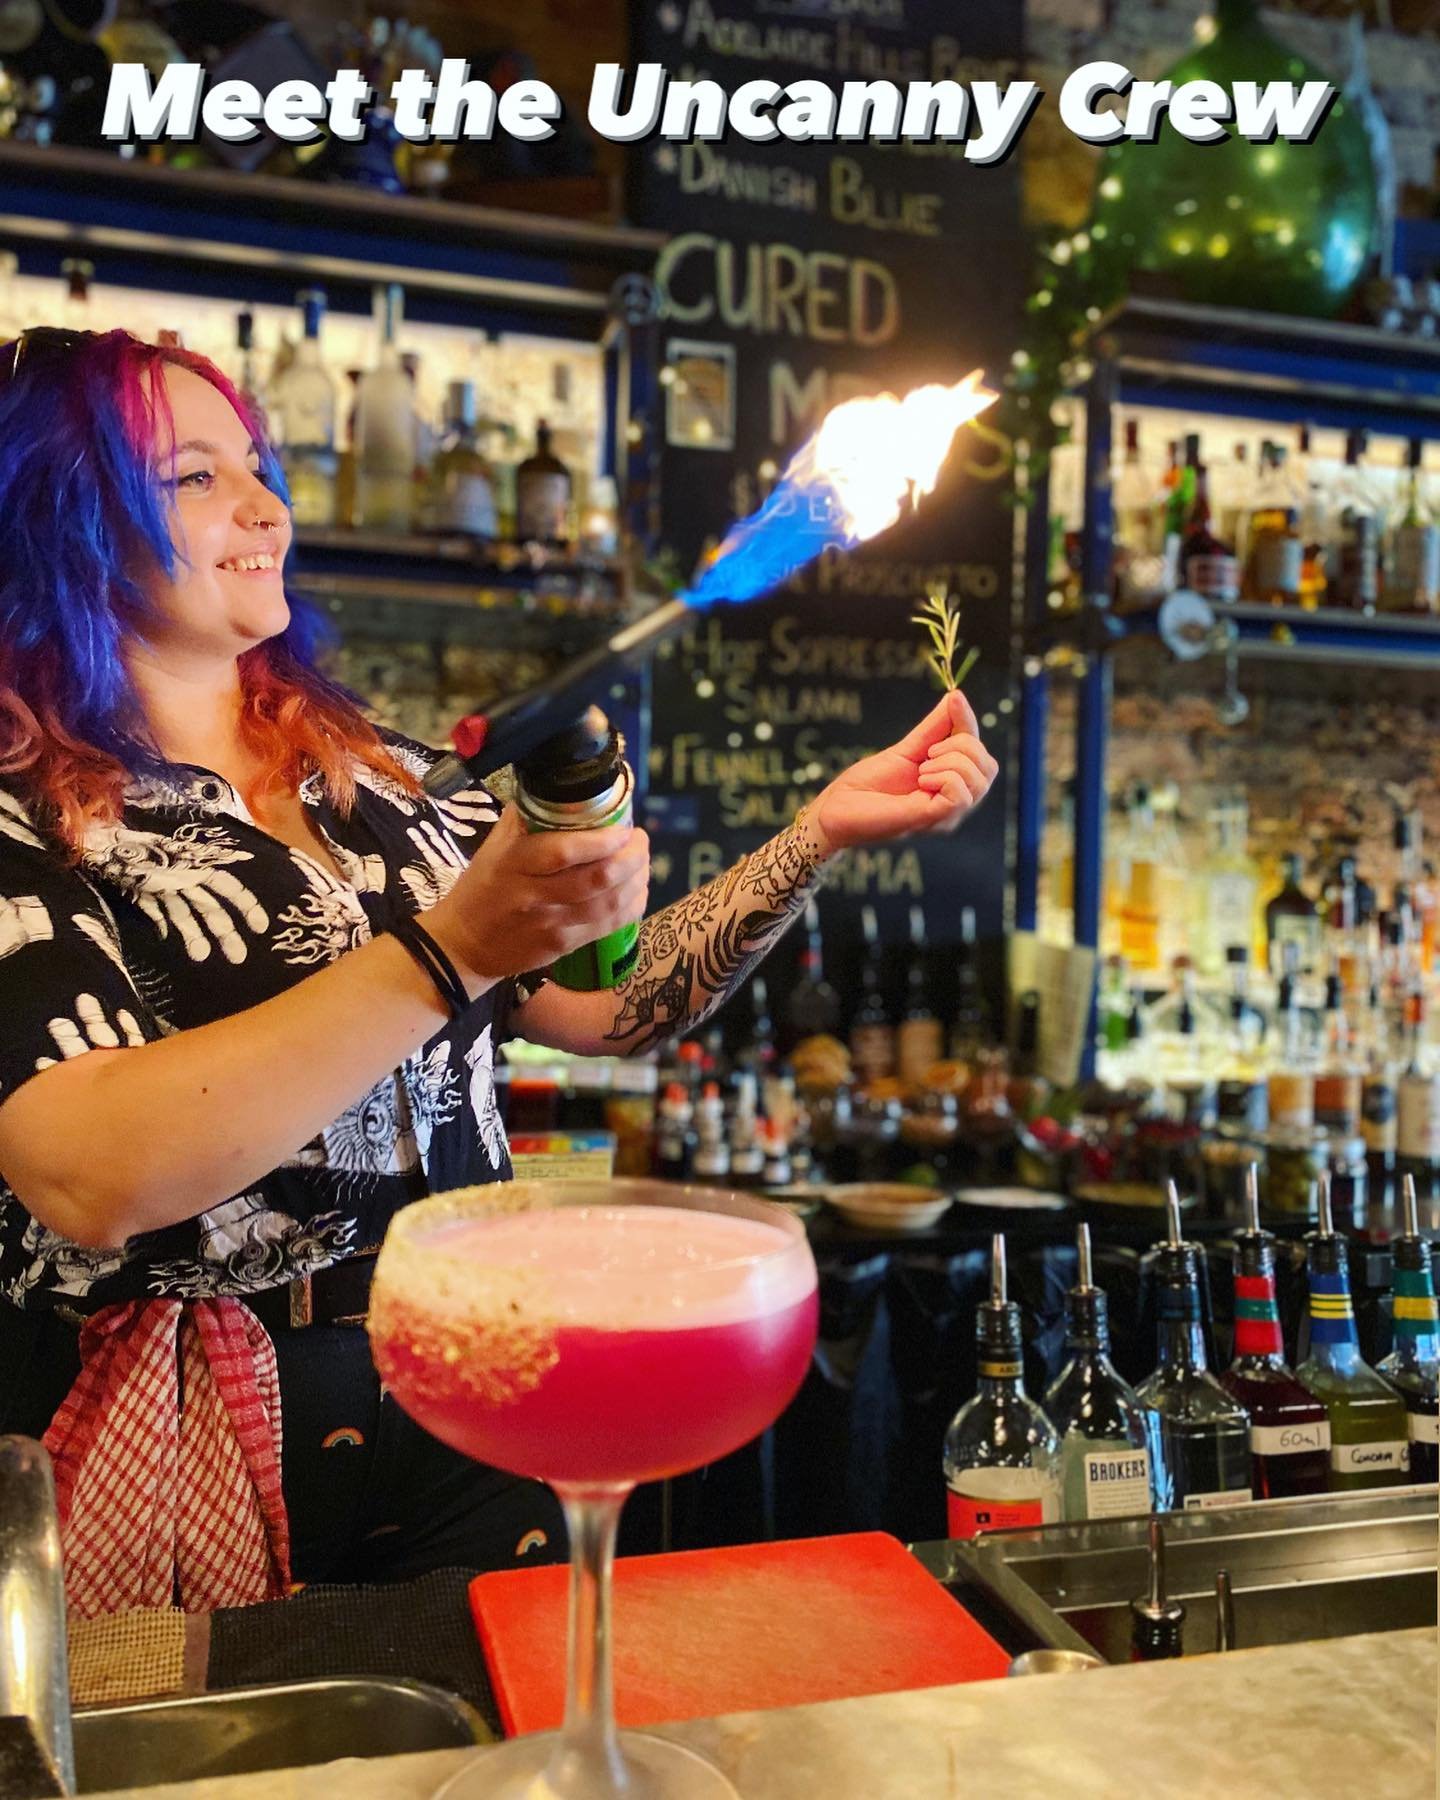 Meet our bright and bubbly Bar Manager, Nicole! 🌈
AKA: Nic
ROLE: Bar Manager
SUPER POWER: Writing funny blackboard signs
FAVOURITE DRINK: Amaretto Sour or Bloody Mary 
FUN FACT: Nic&rsquo;s a bit of a shy muso, she can play piano, ukulele and sing!